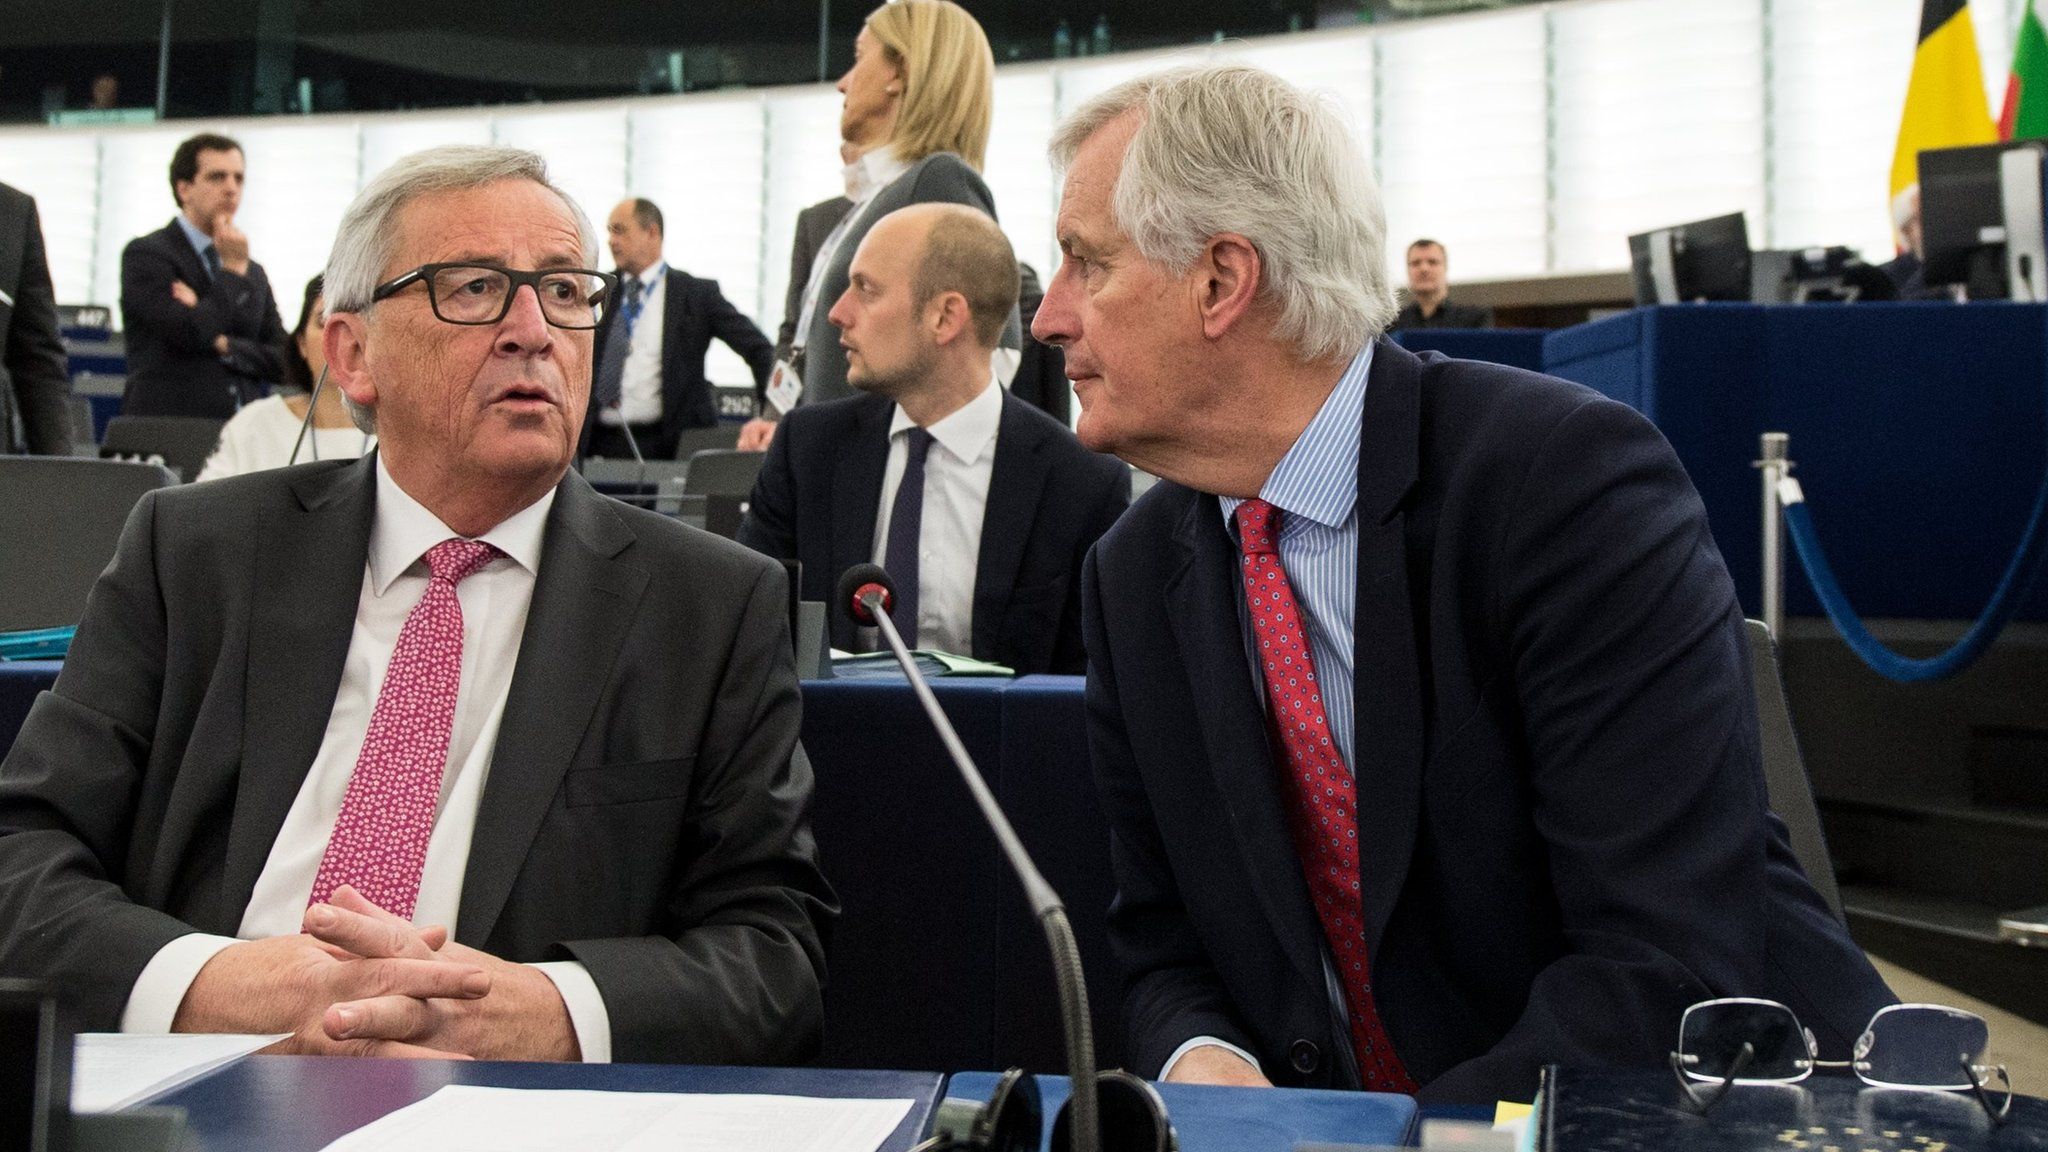 Michel Barnier (R), European Chief Negotiator for Brexit and Jean-Claude Juncker, President of the European Commission